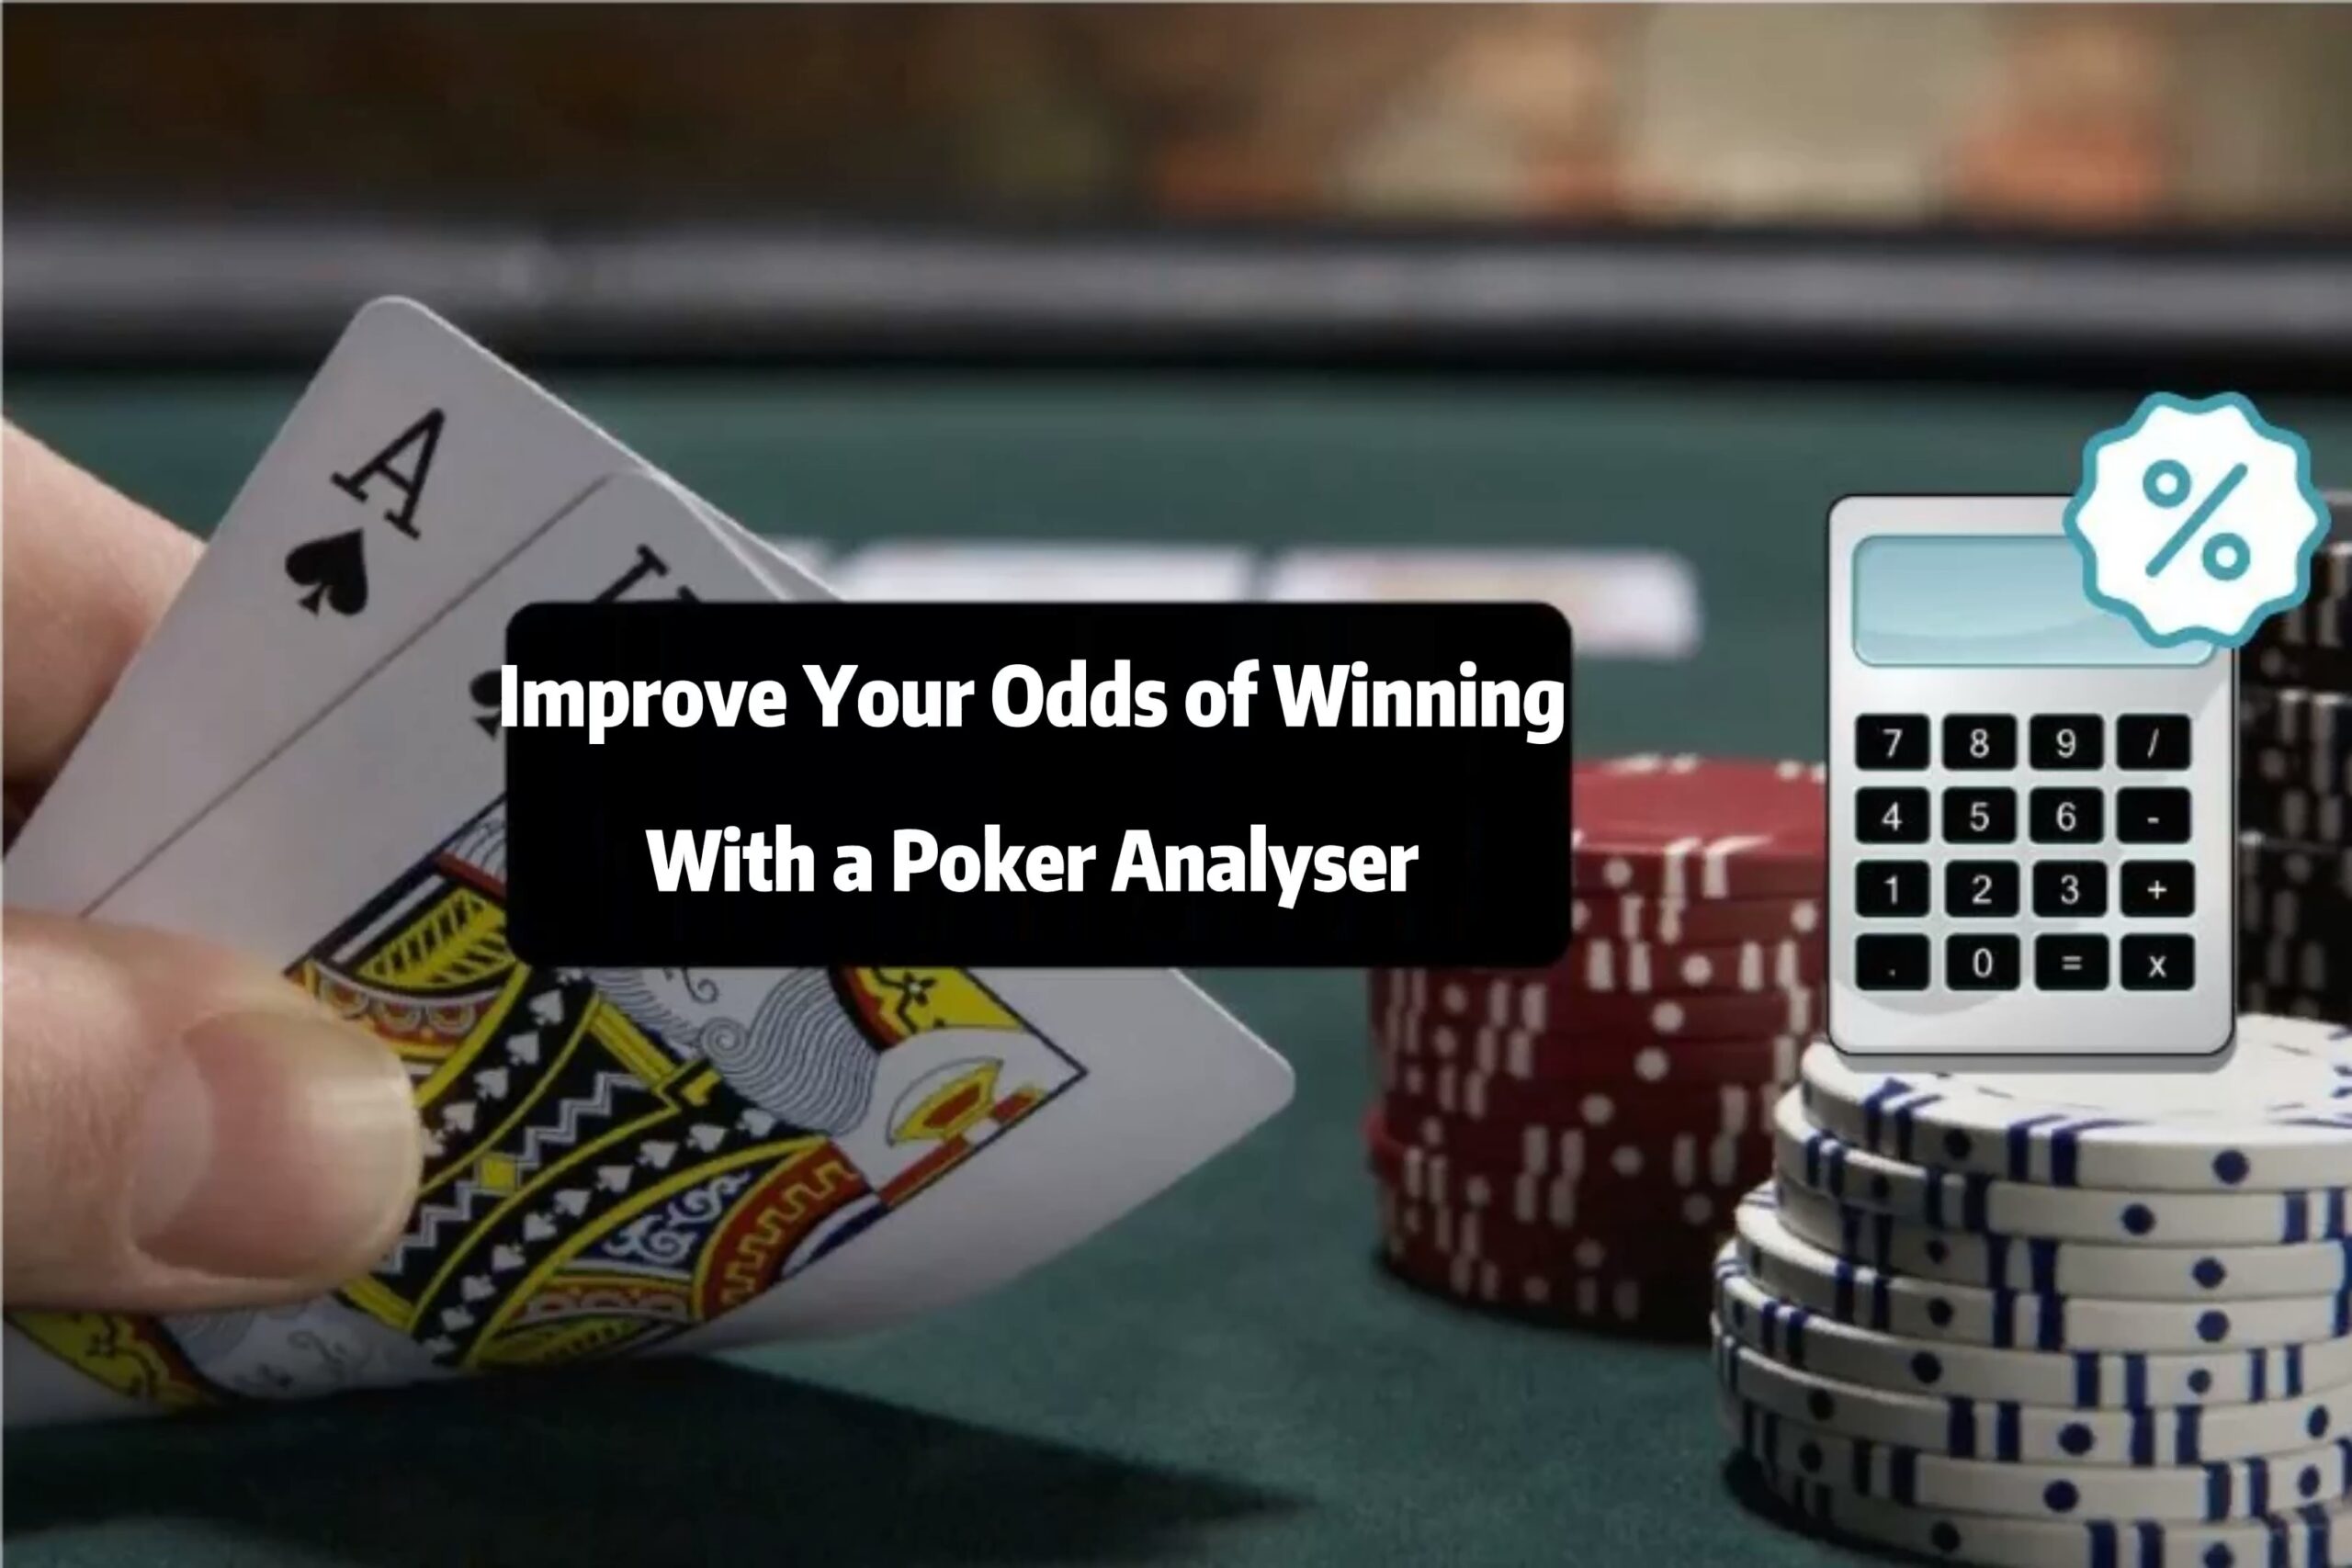 Improve Your Odds of Winning With a Poker Analyser